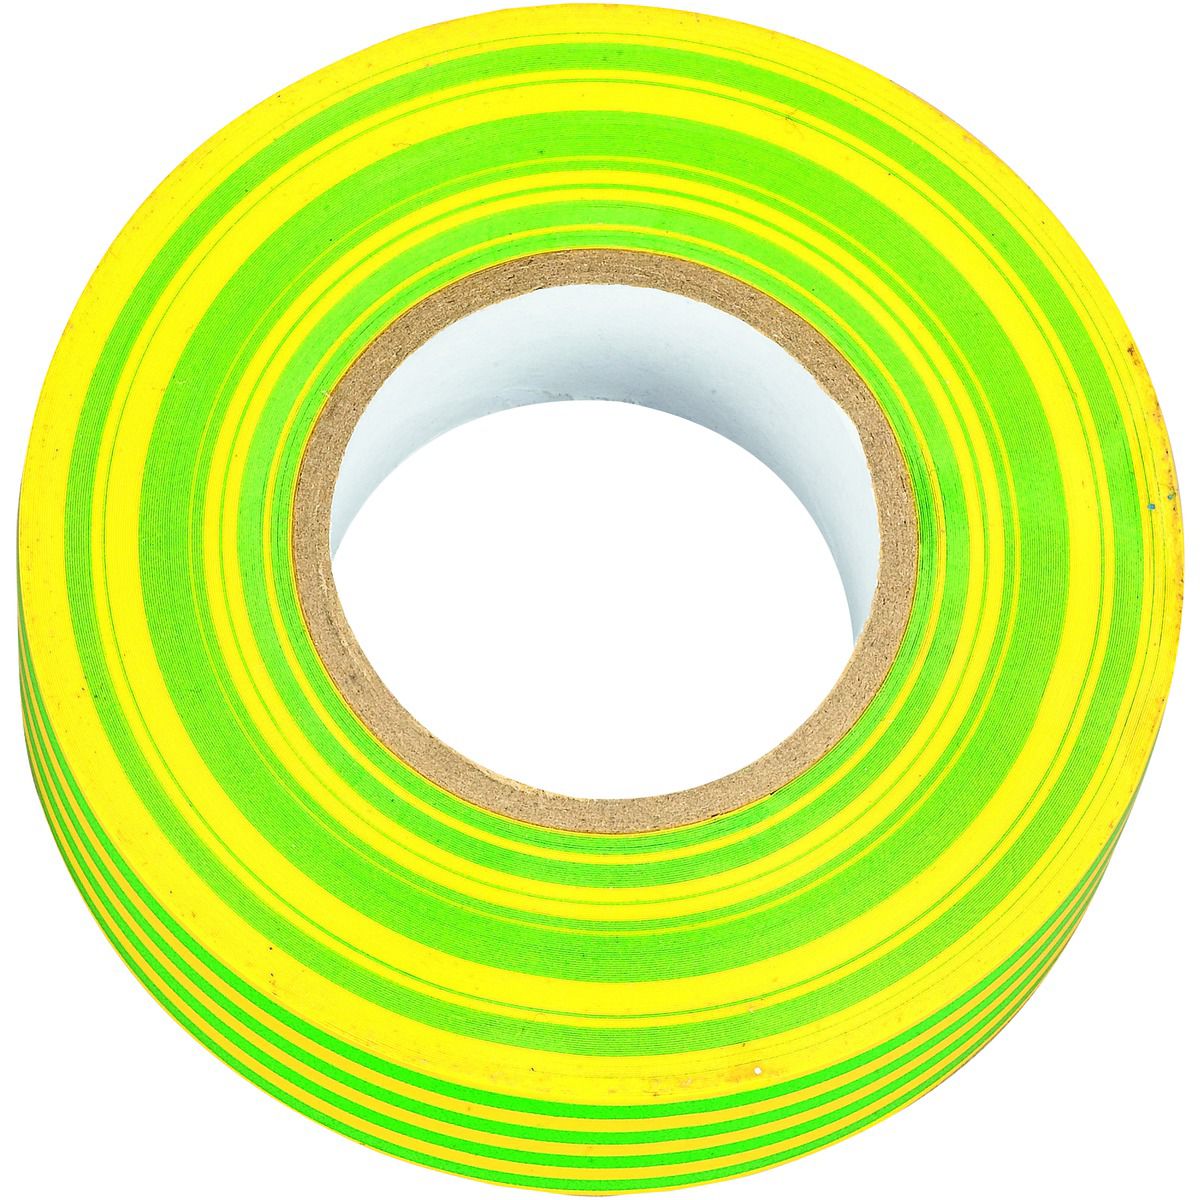 Image of Deta Green & Yellow PVC Electrical Insulation Tape - 20m x 19mm - Pack of 10